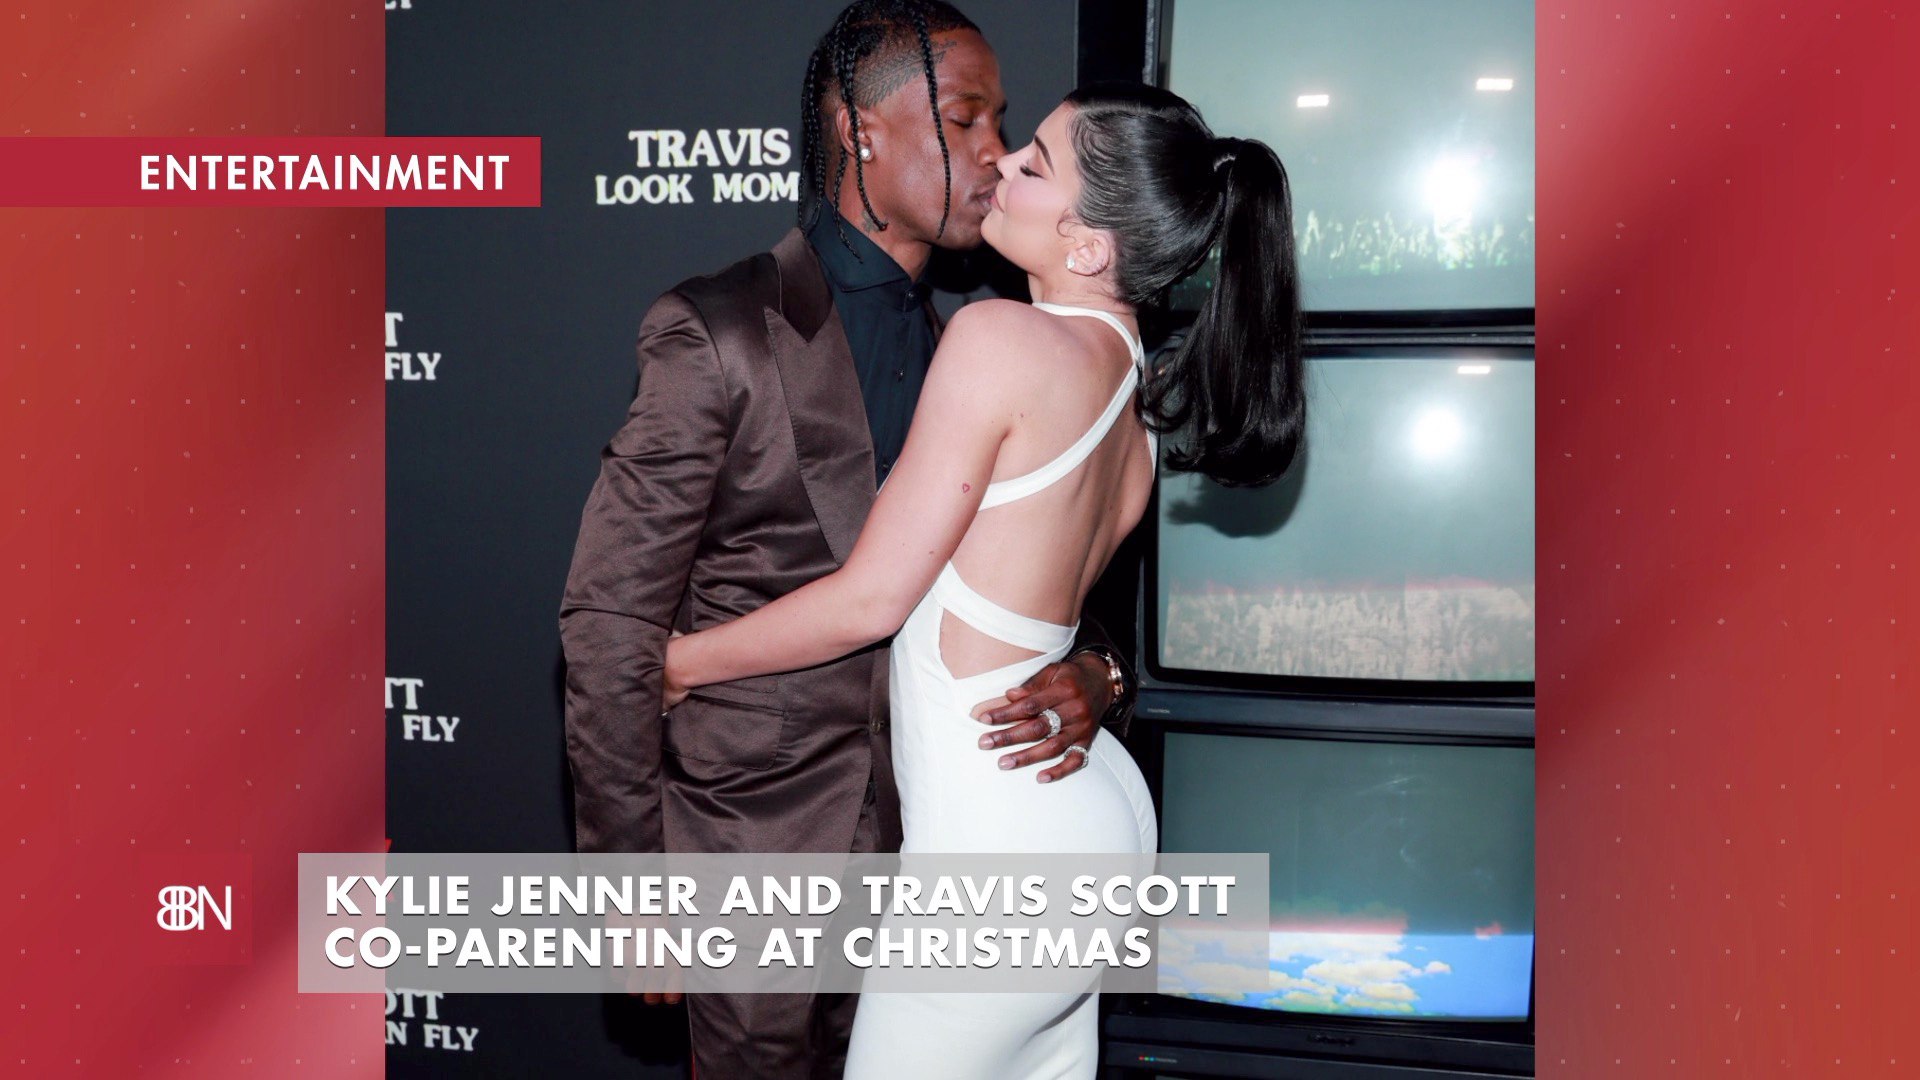 Kylie Jenner And Travis Scott On Christmas